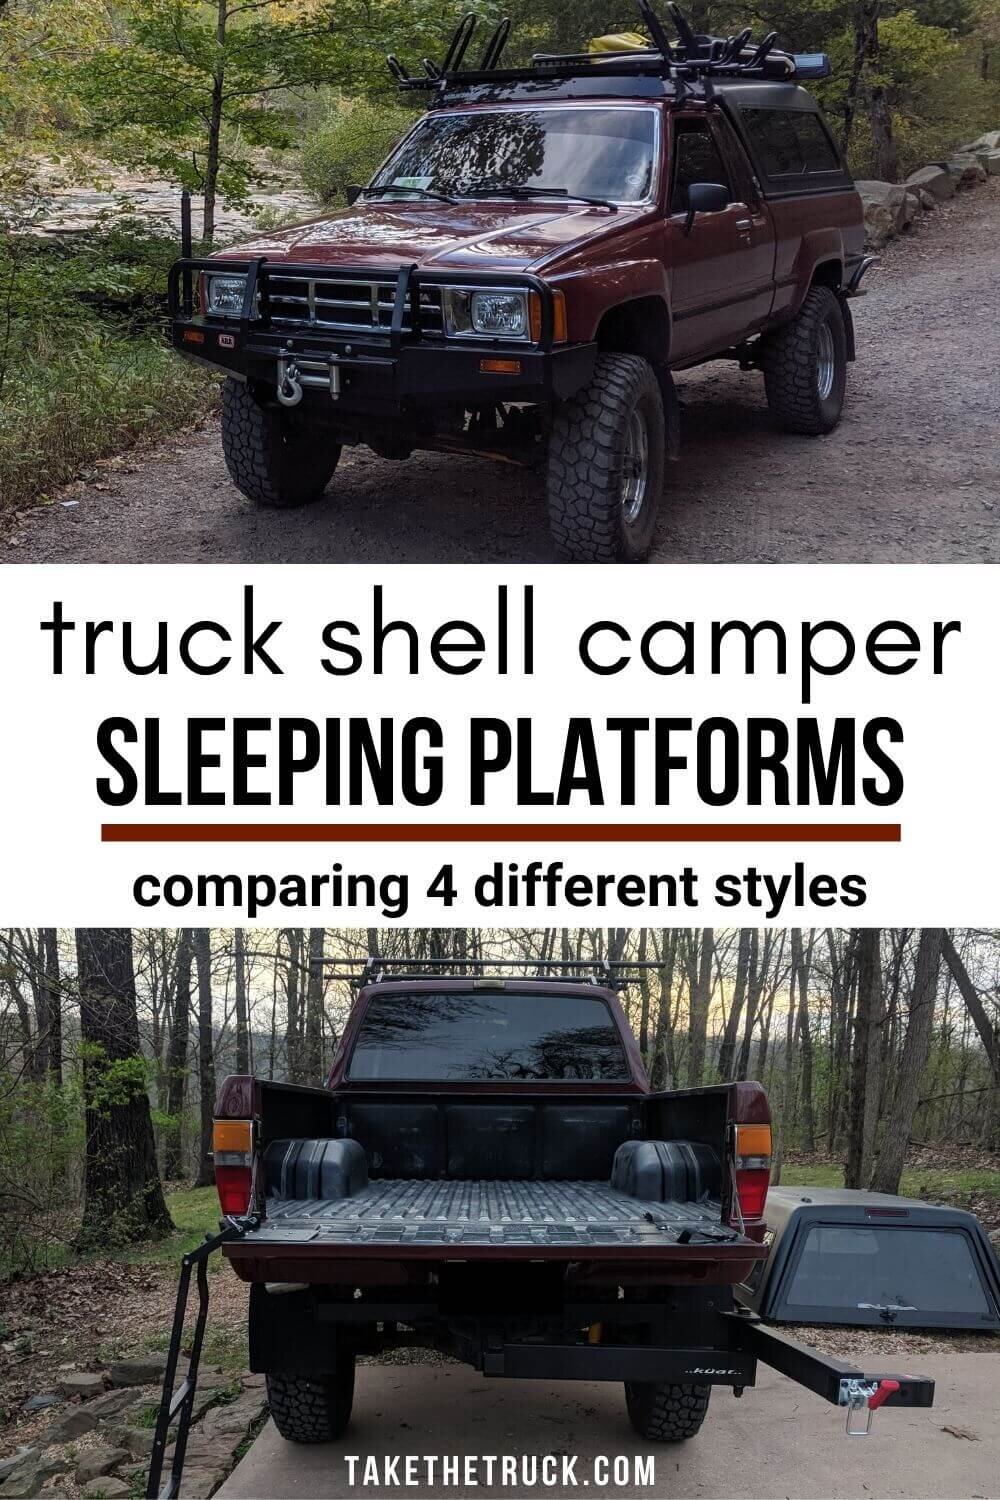 Pros and cons of different DIY truck bed camping platform builds. Will help you with DIY elevated sleeping platform ideas, plans, materials, and designs for your truck camper.